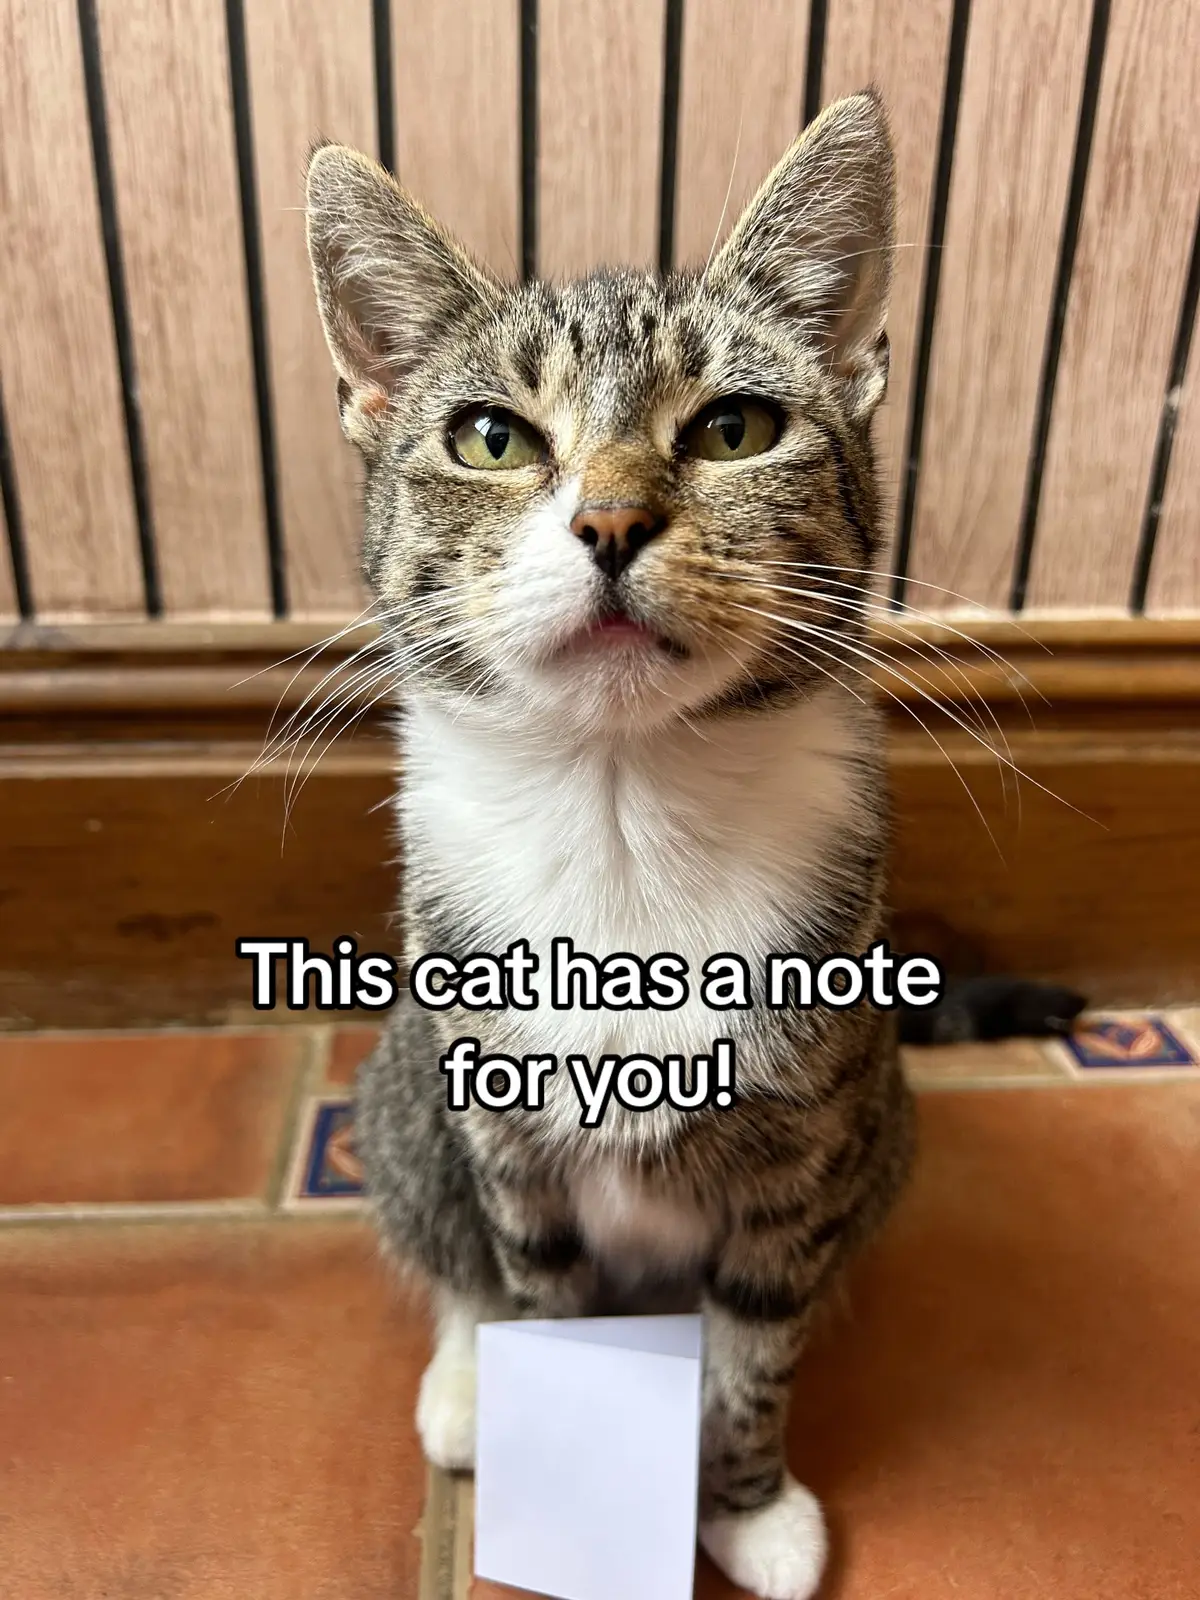 Do you like her note? #cat #cute #animals 